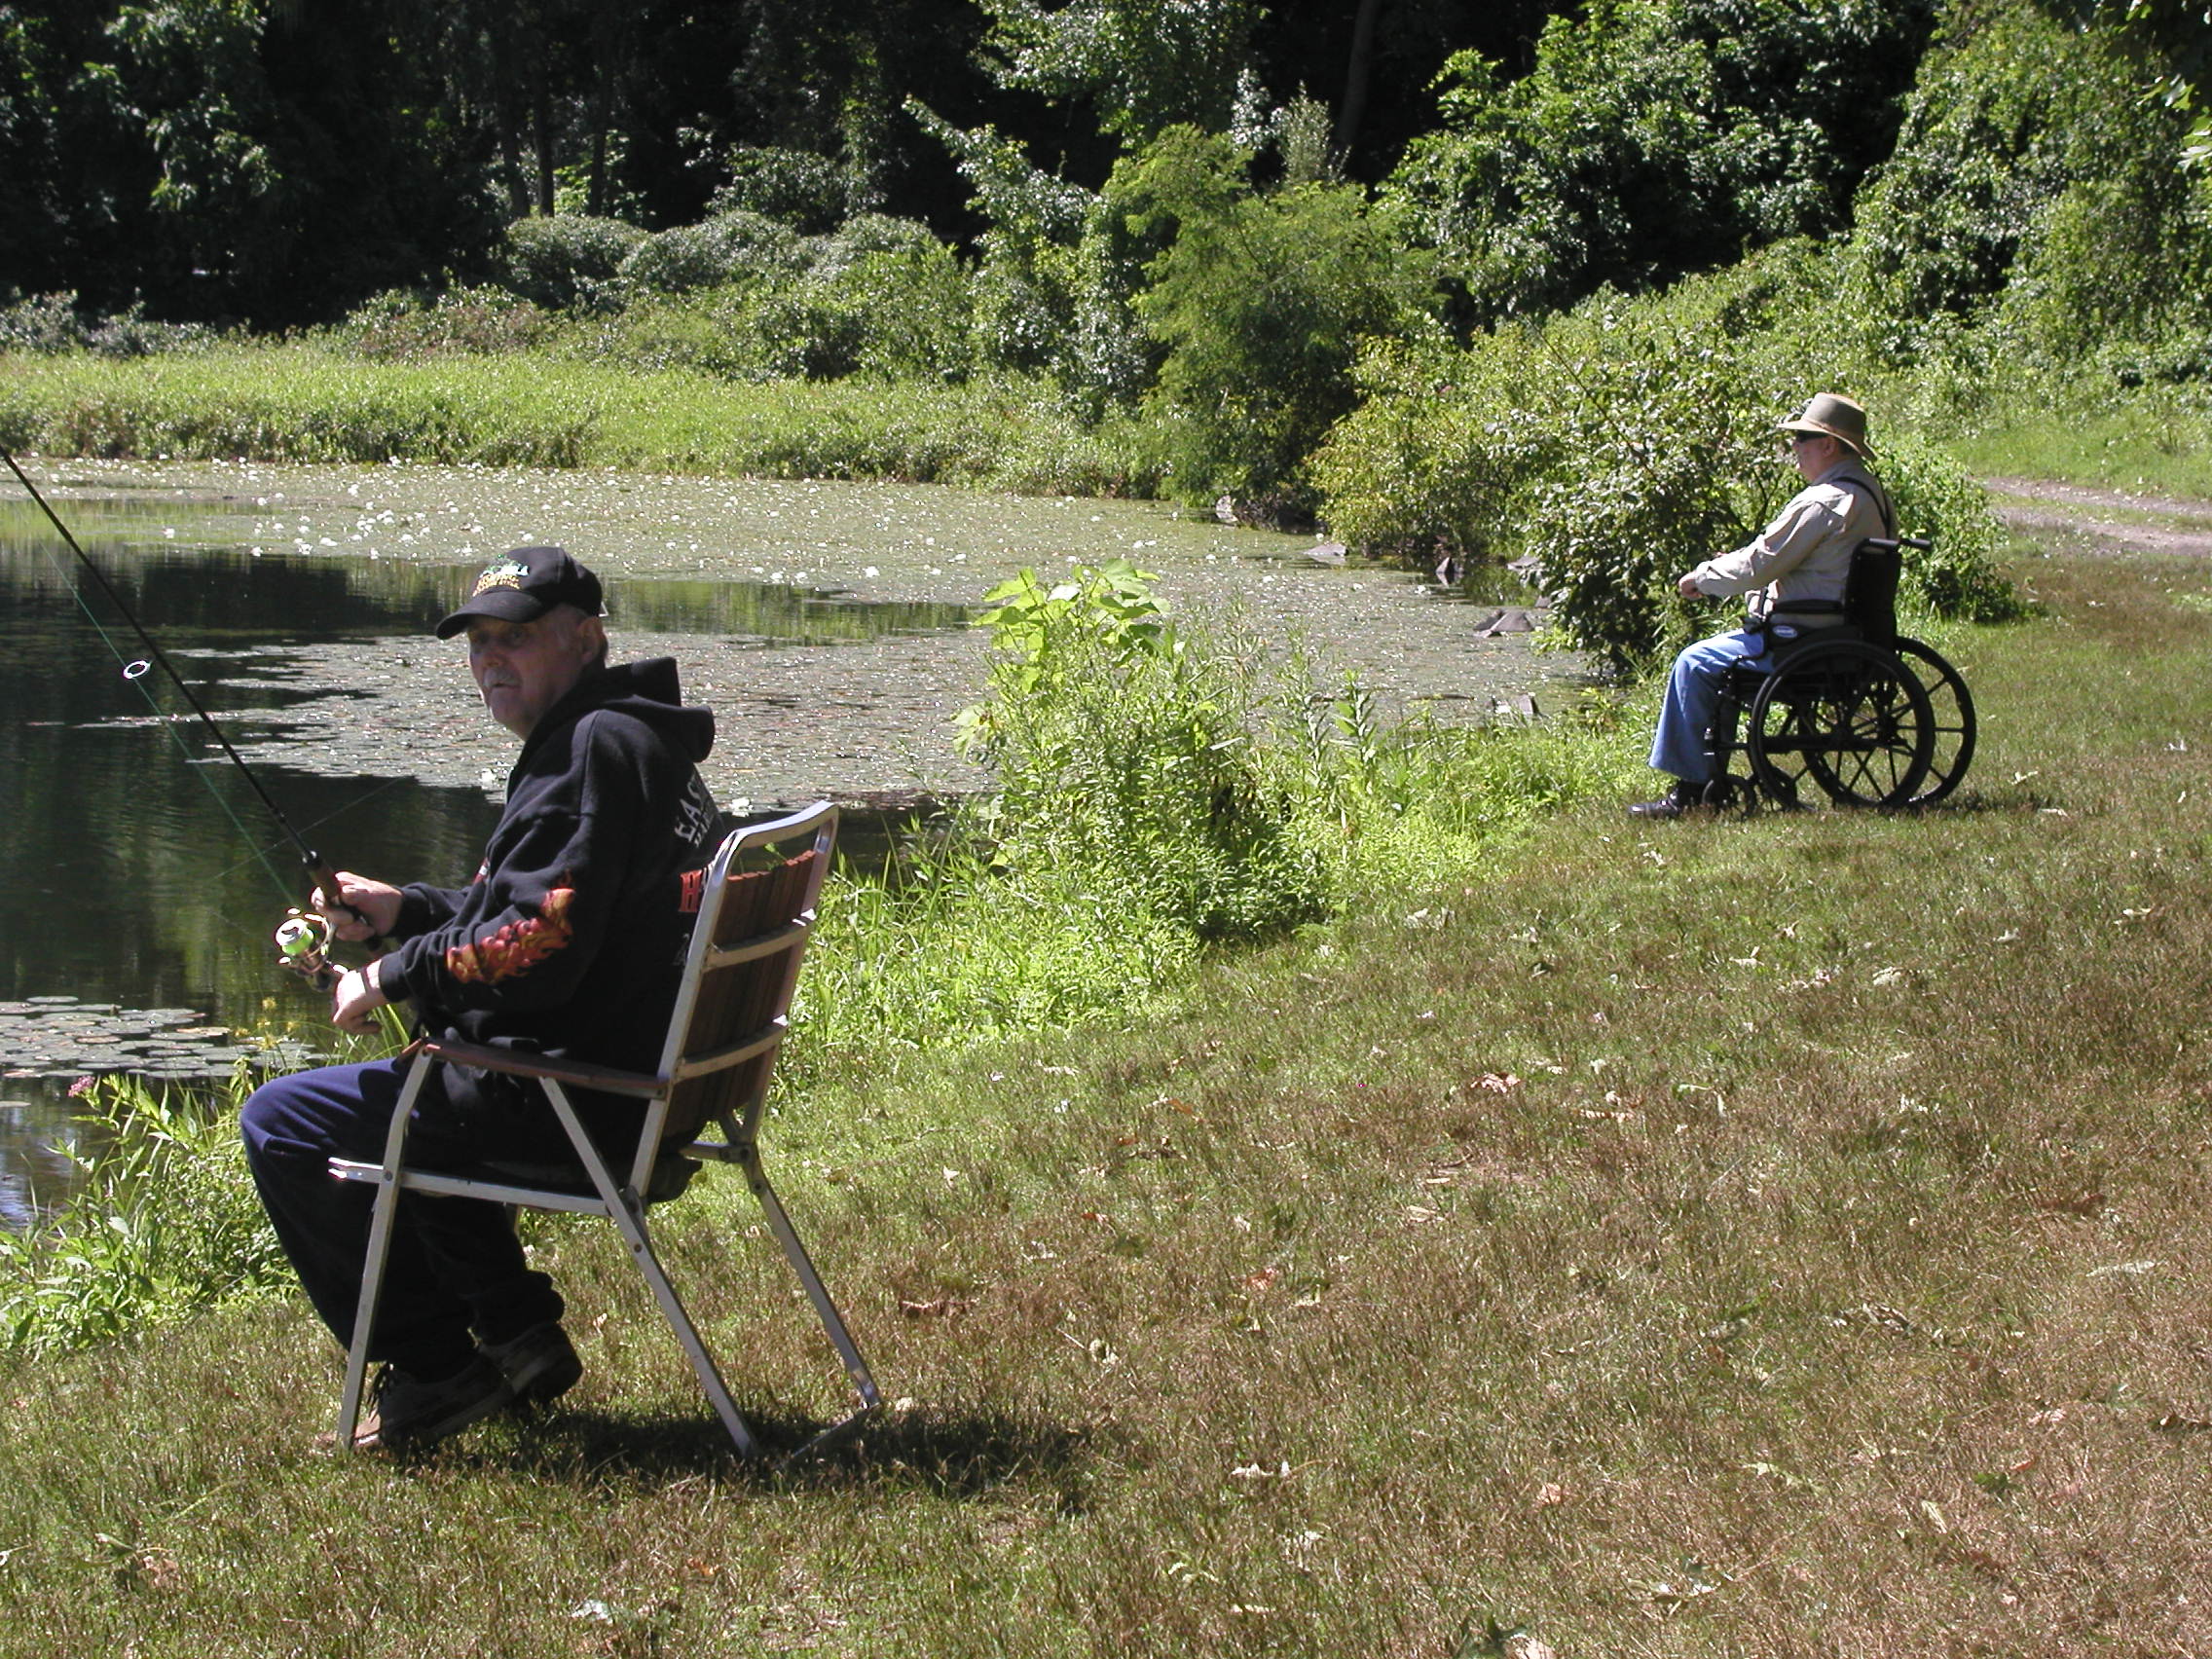 Two people are fishing on a grassy shoreline. One of the people is using a wheelchair.